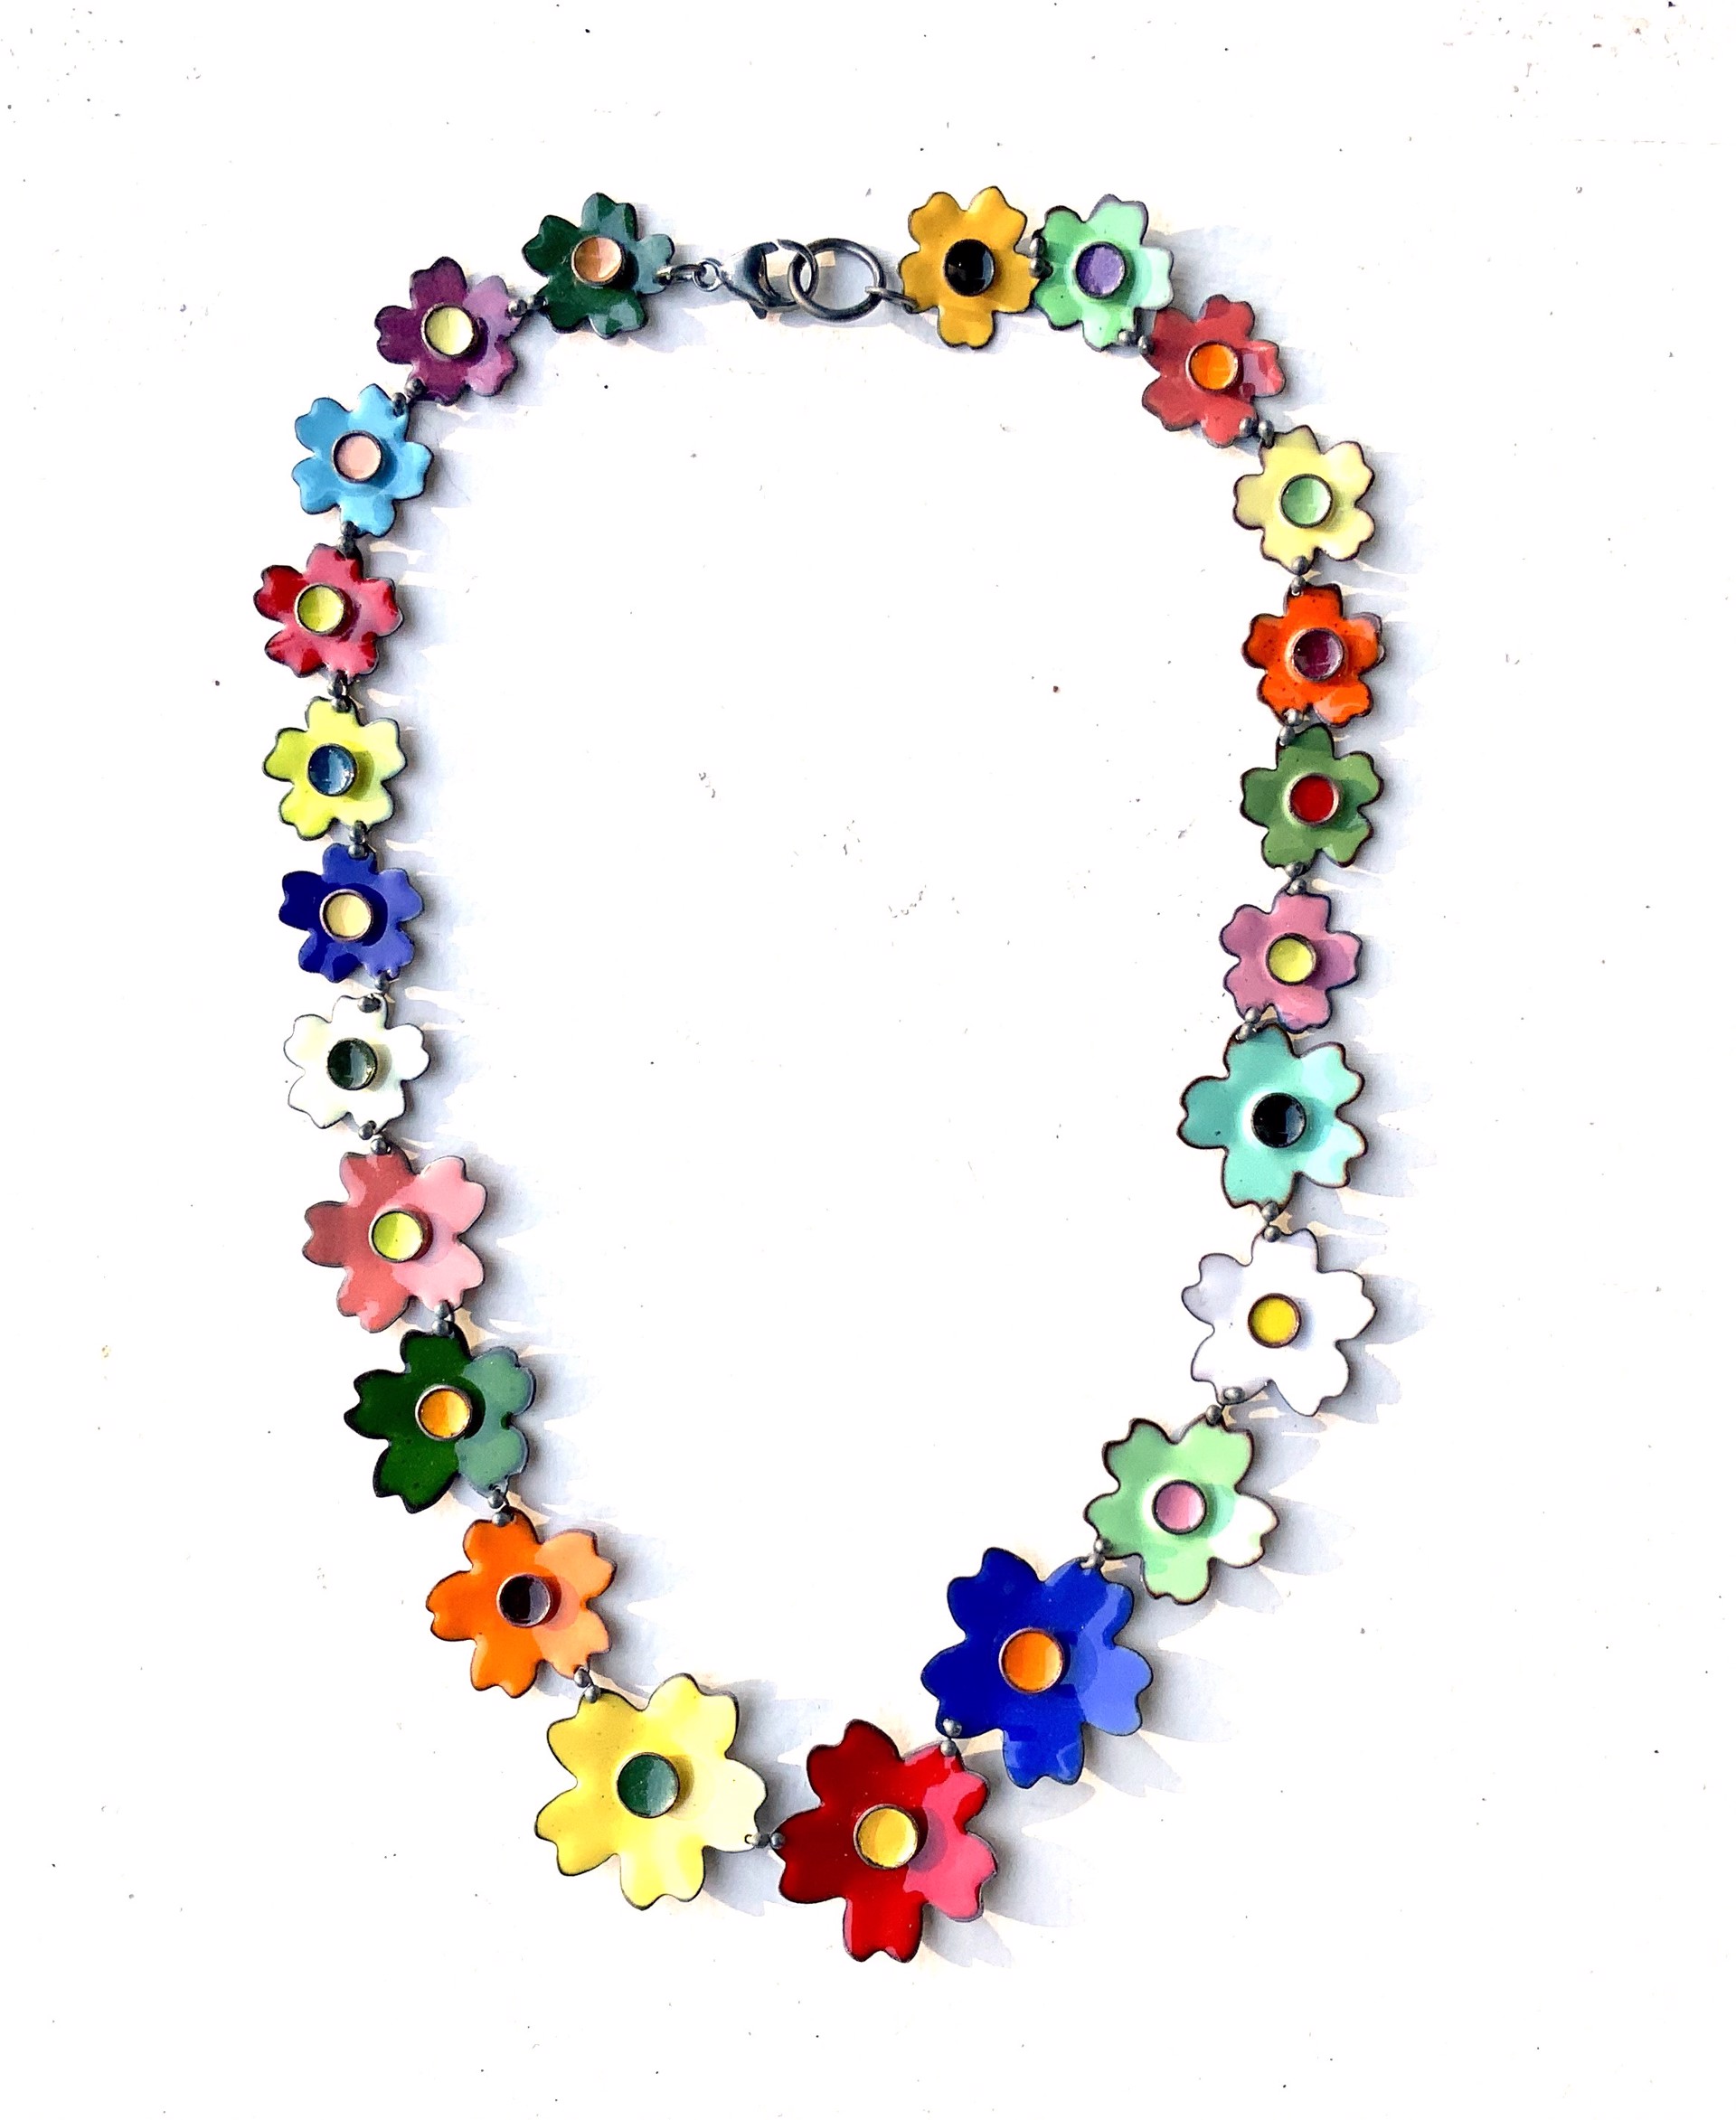 Flower Necklace by Monty Phillips